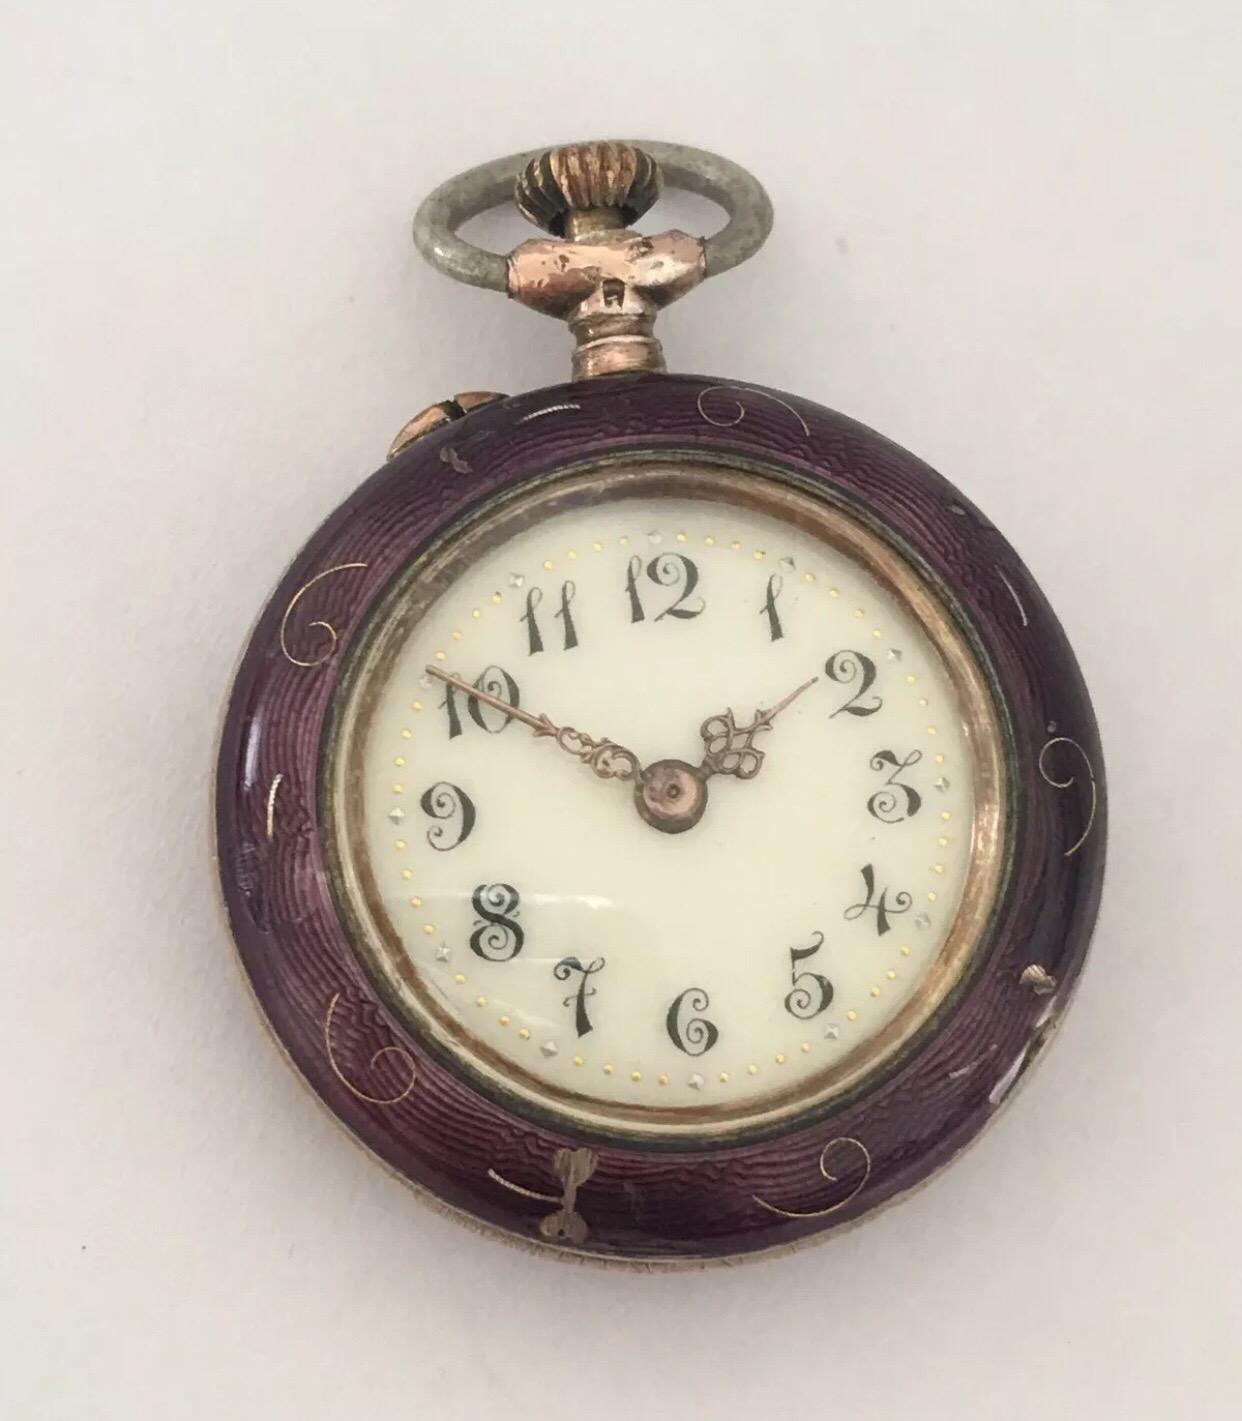 Antique Silver Purple Enamel Victorian Fob Watch.


This watch is working and ticking well. However I cannot guarantee the time accuracy due to its age . The winder is loose but still able to wind. Visible enamel chipped on the side case and some